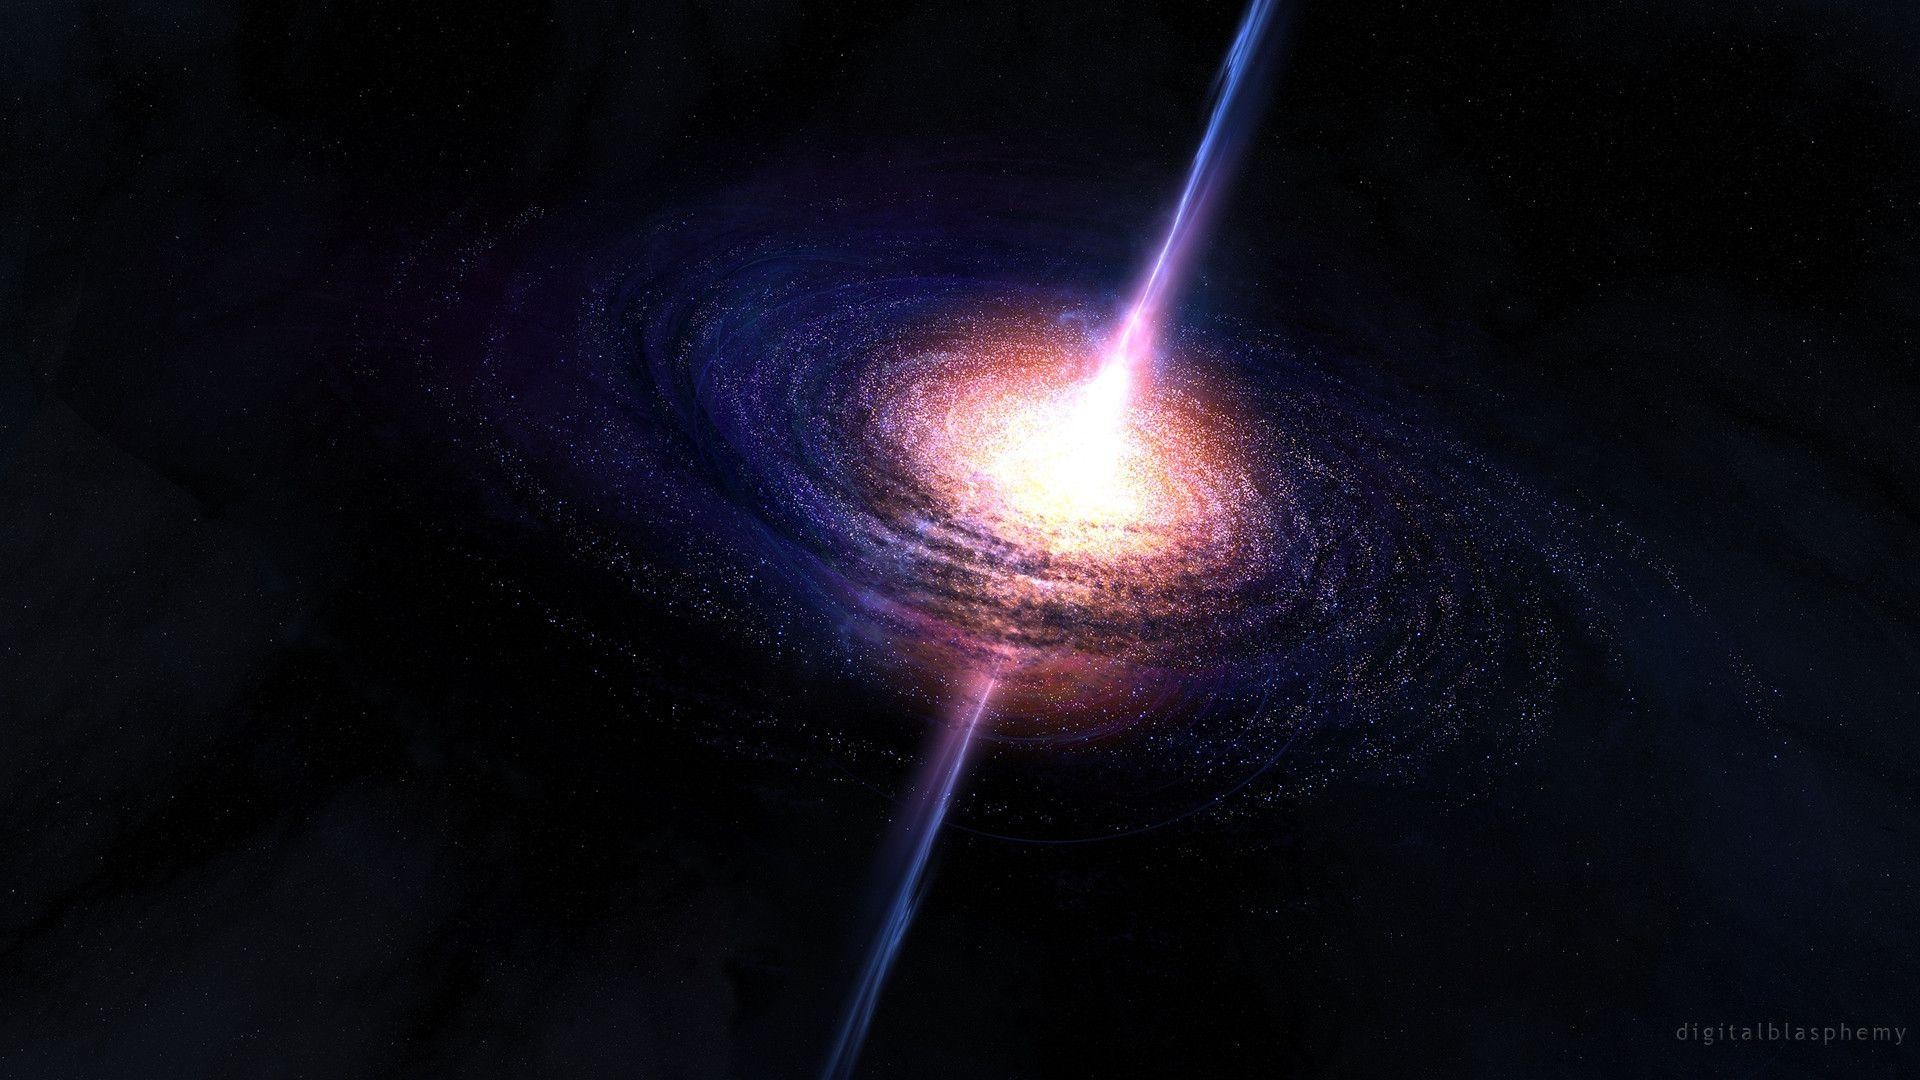 1920x1080 Supermassive Black Hole Wallpaper 30383 Hd Wallpapers in Space .